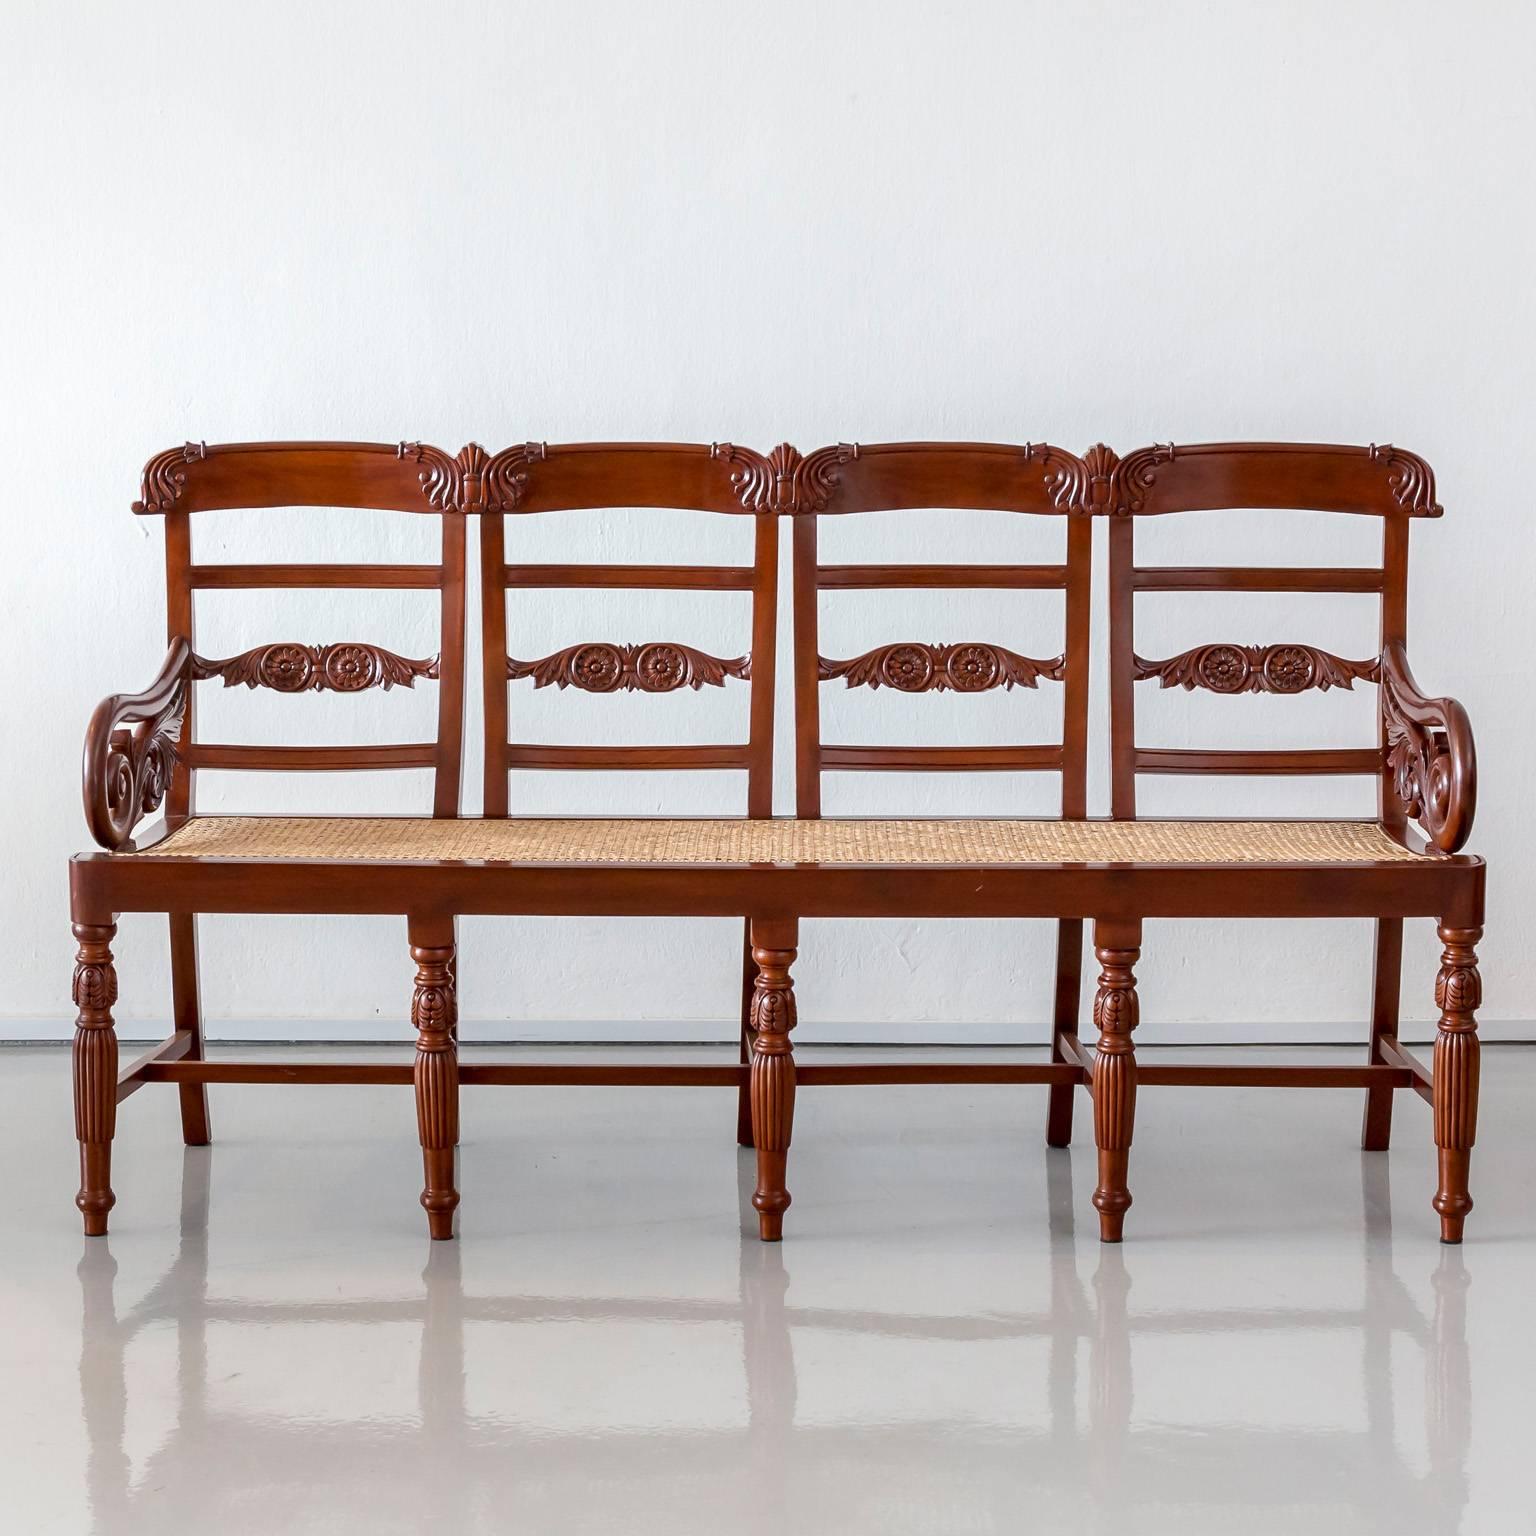 A beautifully carved Portuguese colonial mahogany settee with a quadruple back and newly caned seat. The shaped individual chair backs and rolled armrests are carved with a floral pattern. The settee stands on five reeded and tapered front legs and